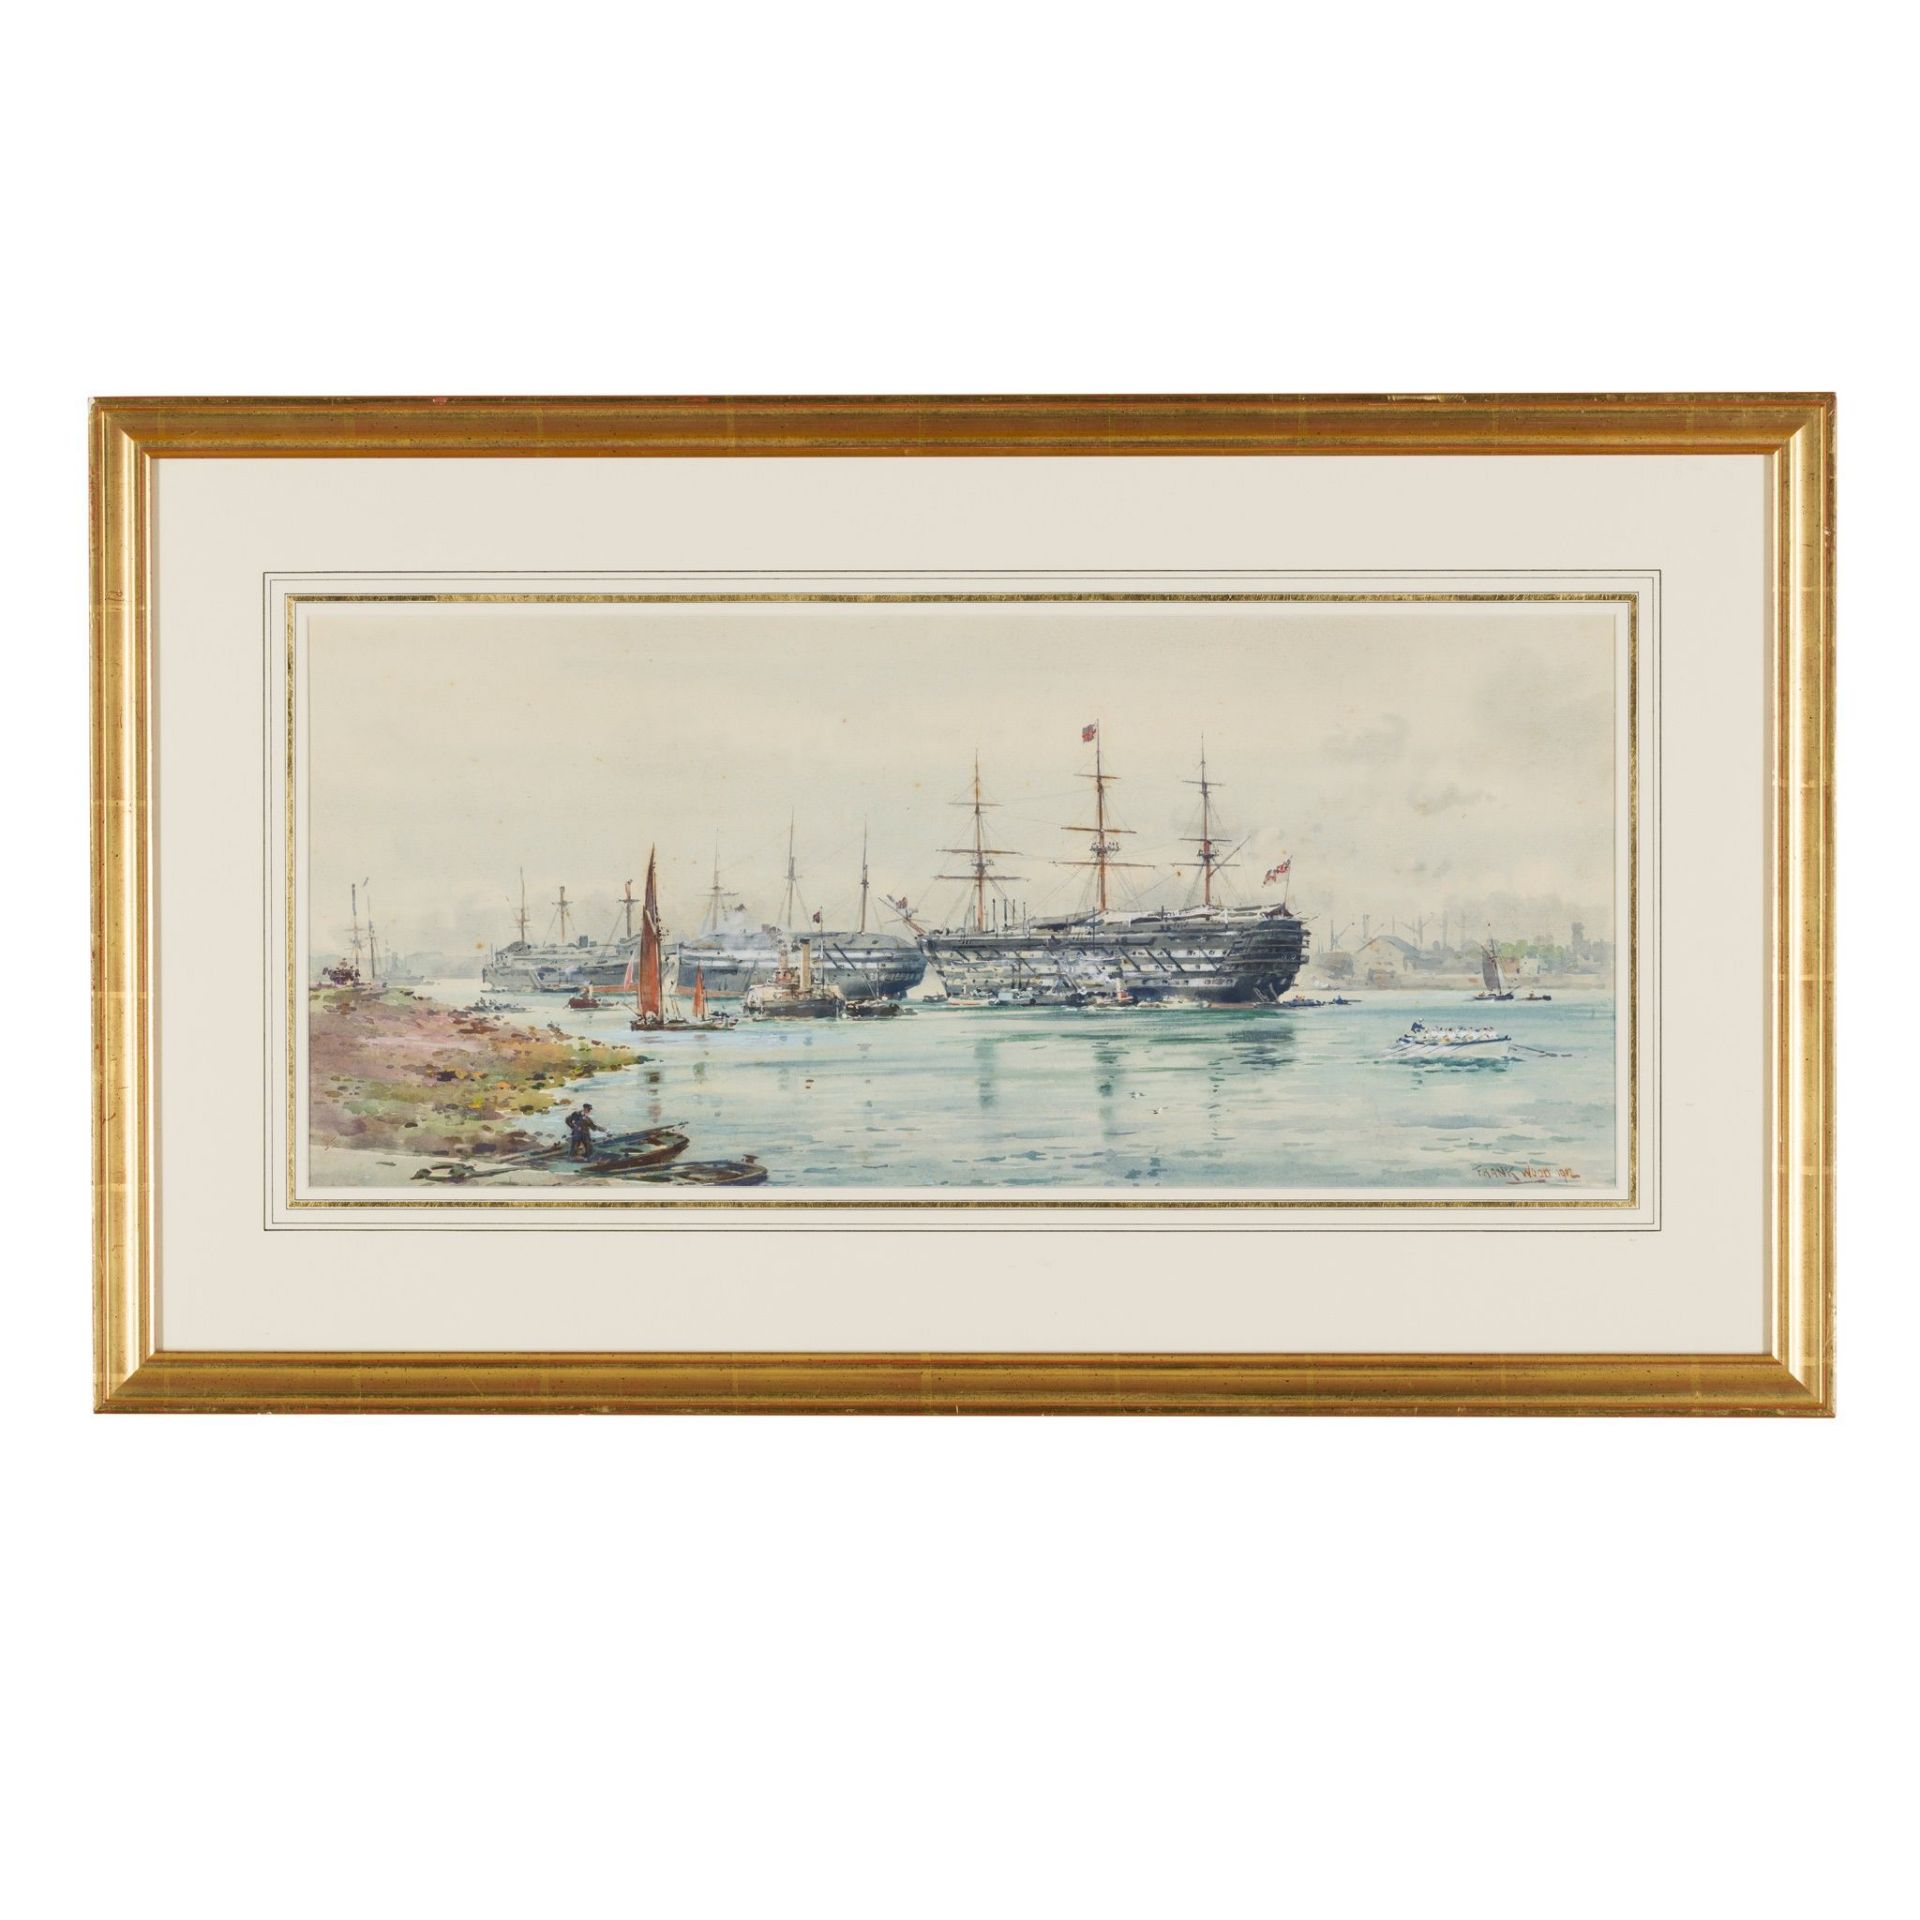 § FRANK WATSON WOOD (SCOTTISH 1862-1953) H M S VICTORY IN PORTSMOUTH HARBOUR - Image 2 of 3